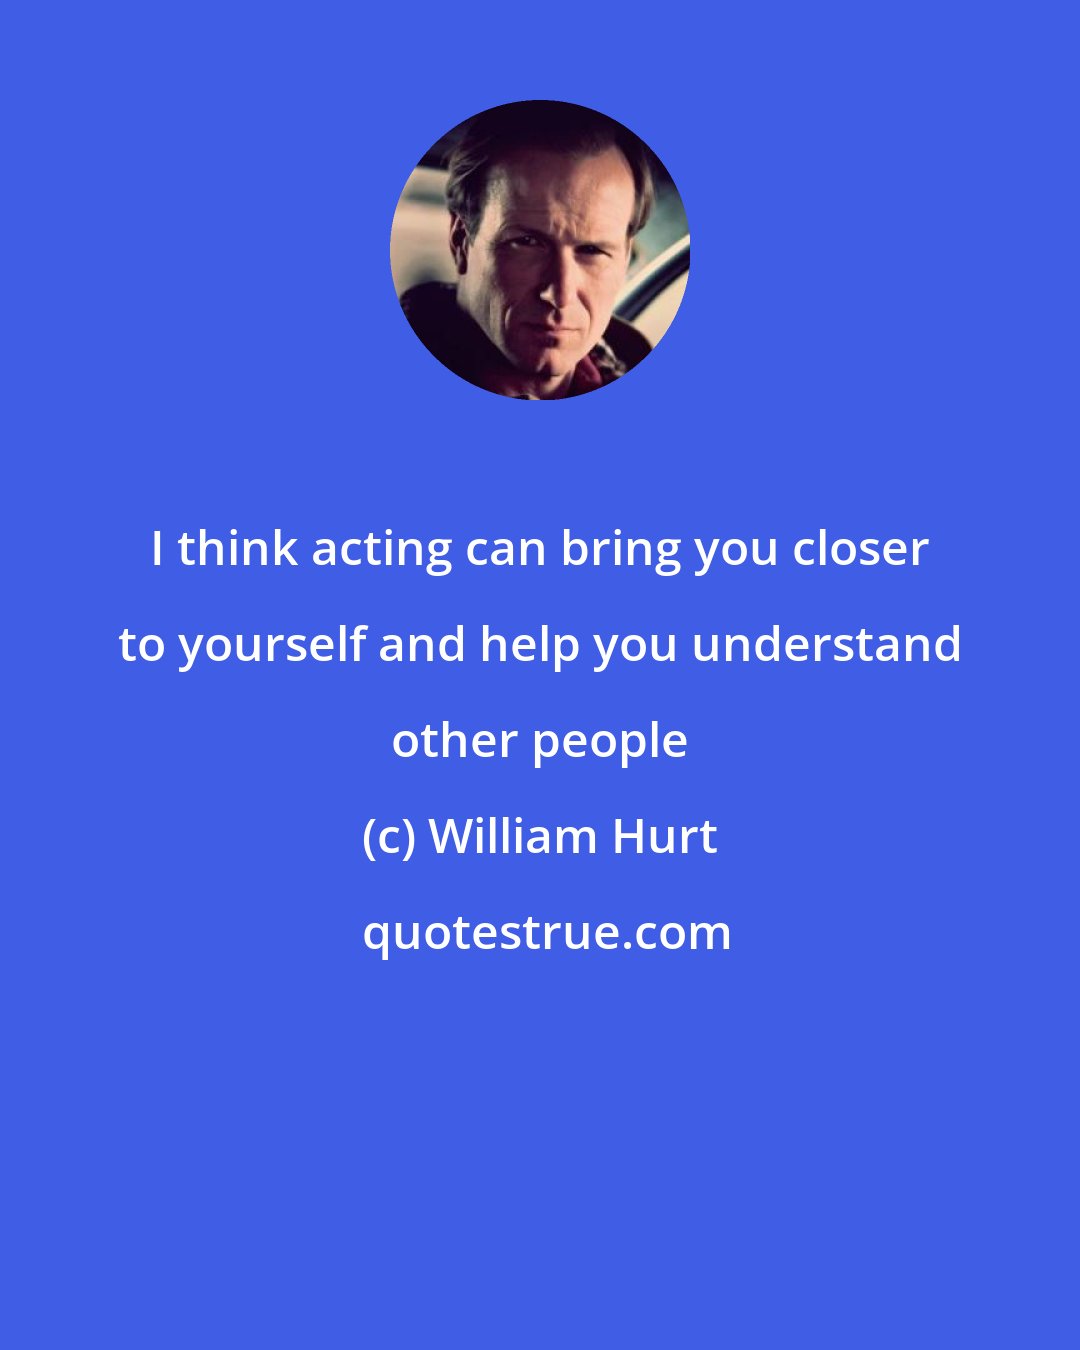 William Hurt: I think acting can bring you closer to yourself and help you understand other people